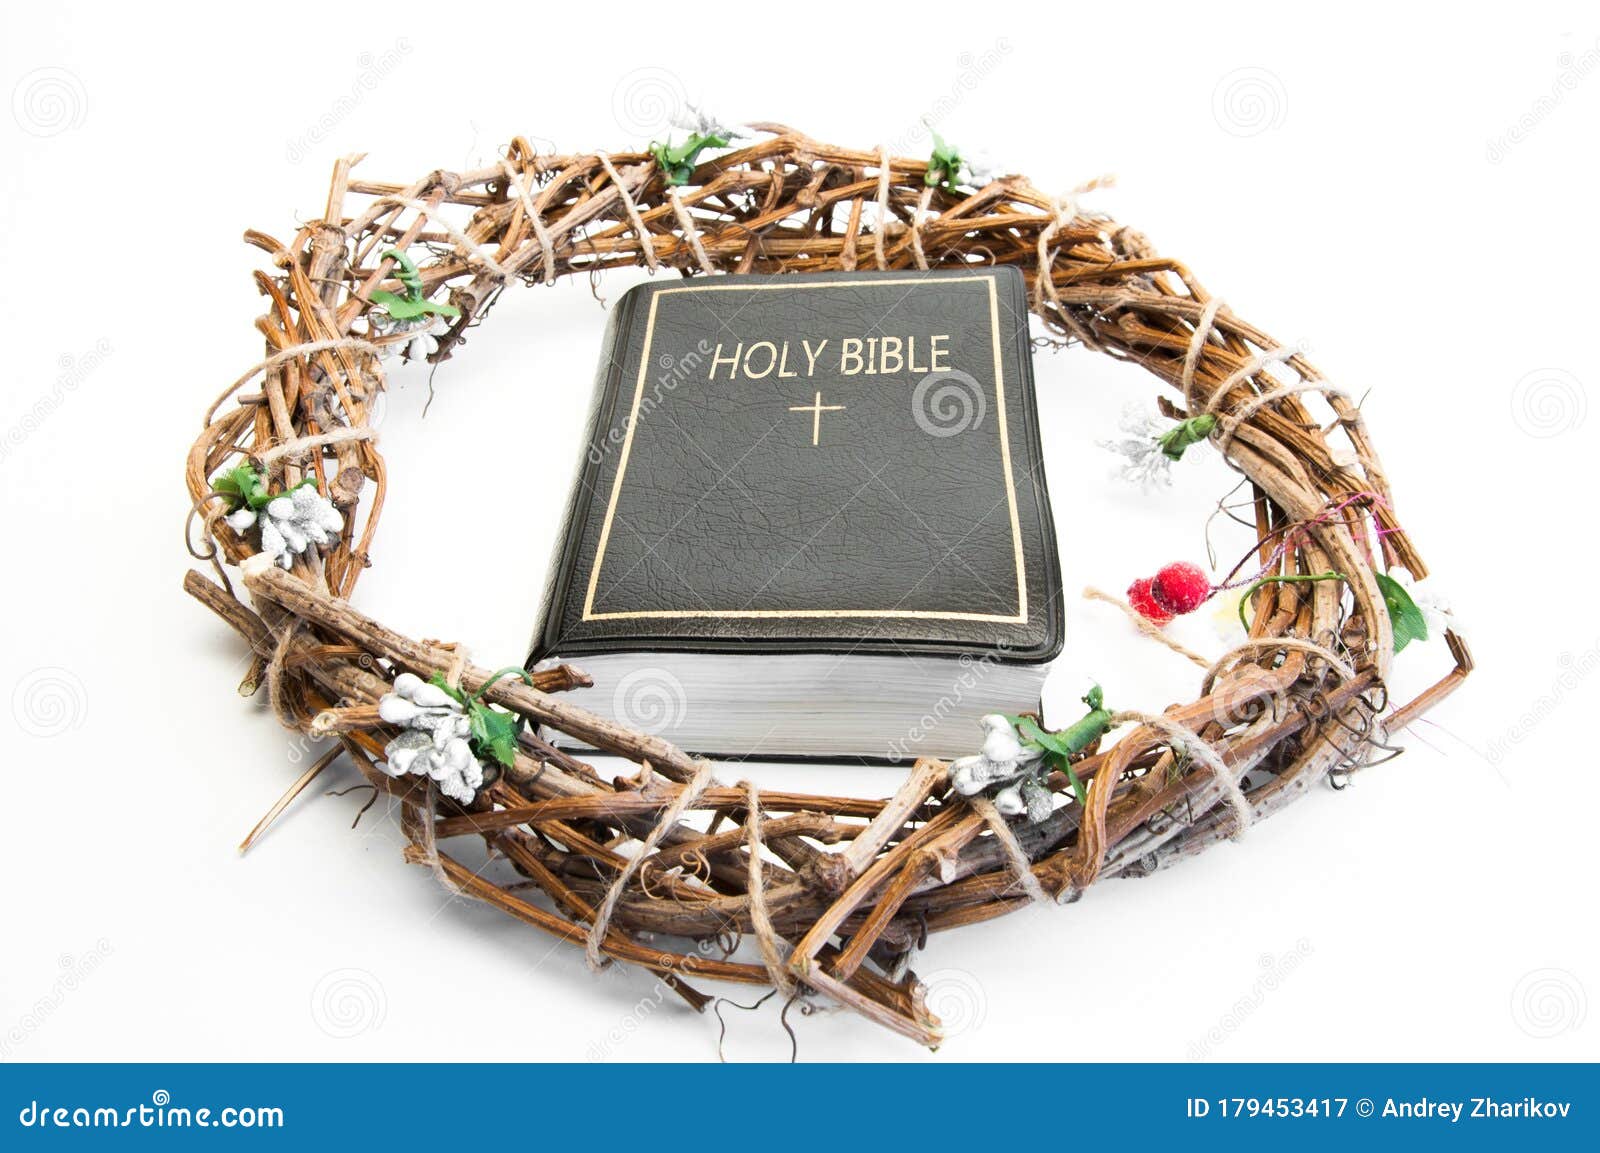 The Bible And The Crown Of Thorns Symbolizing The Crucifixion Of Jesus ...